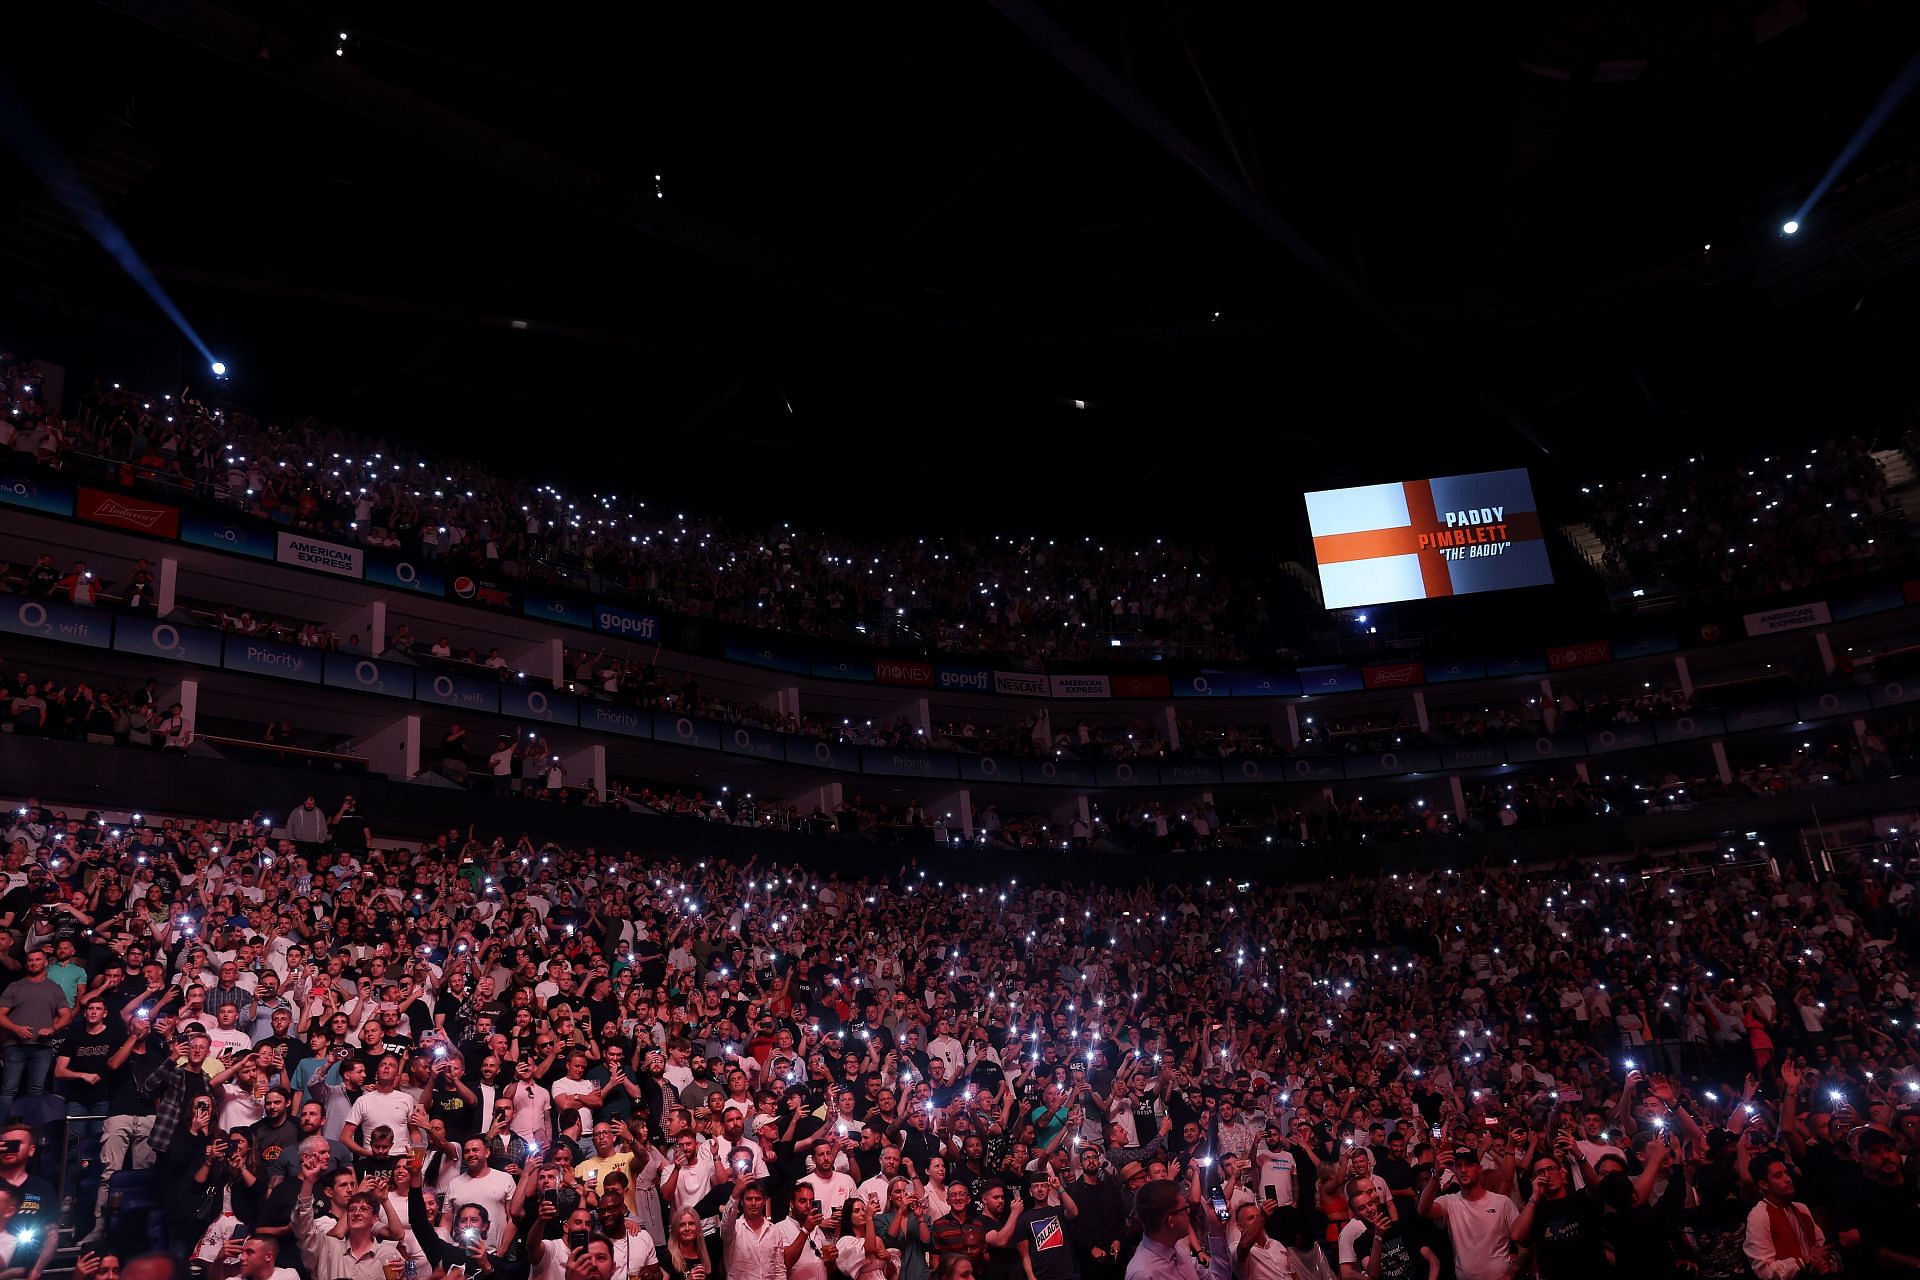 The UFC could sell out any arena for a Fight Night after three years of less travelling